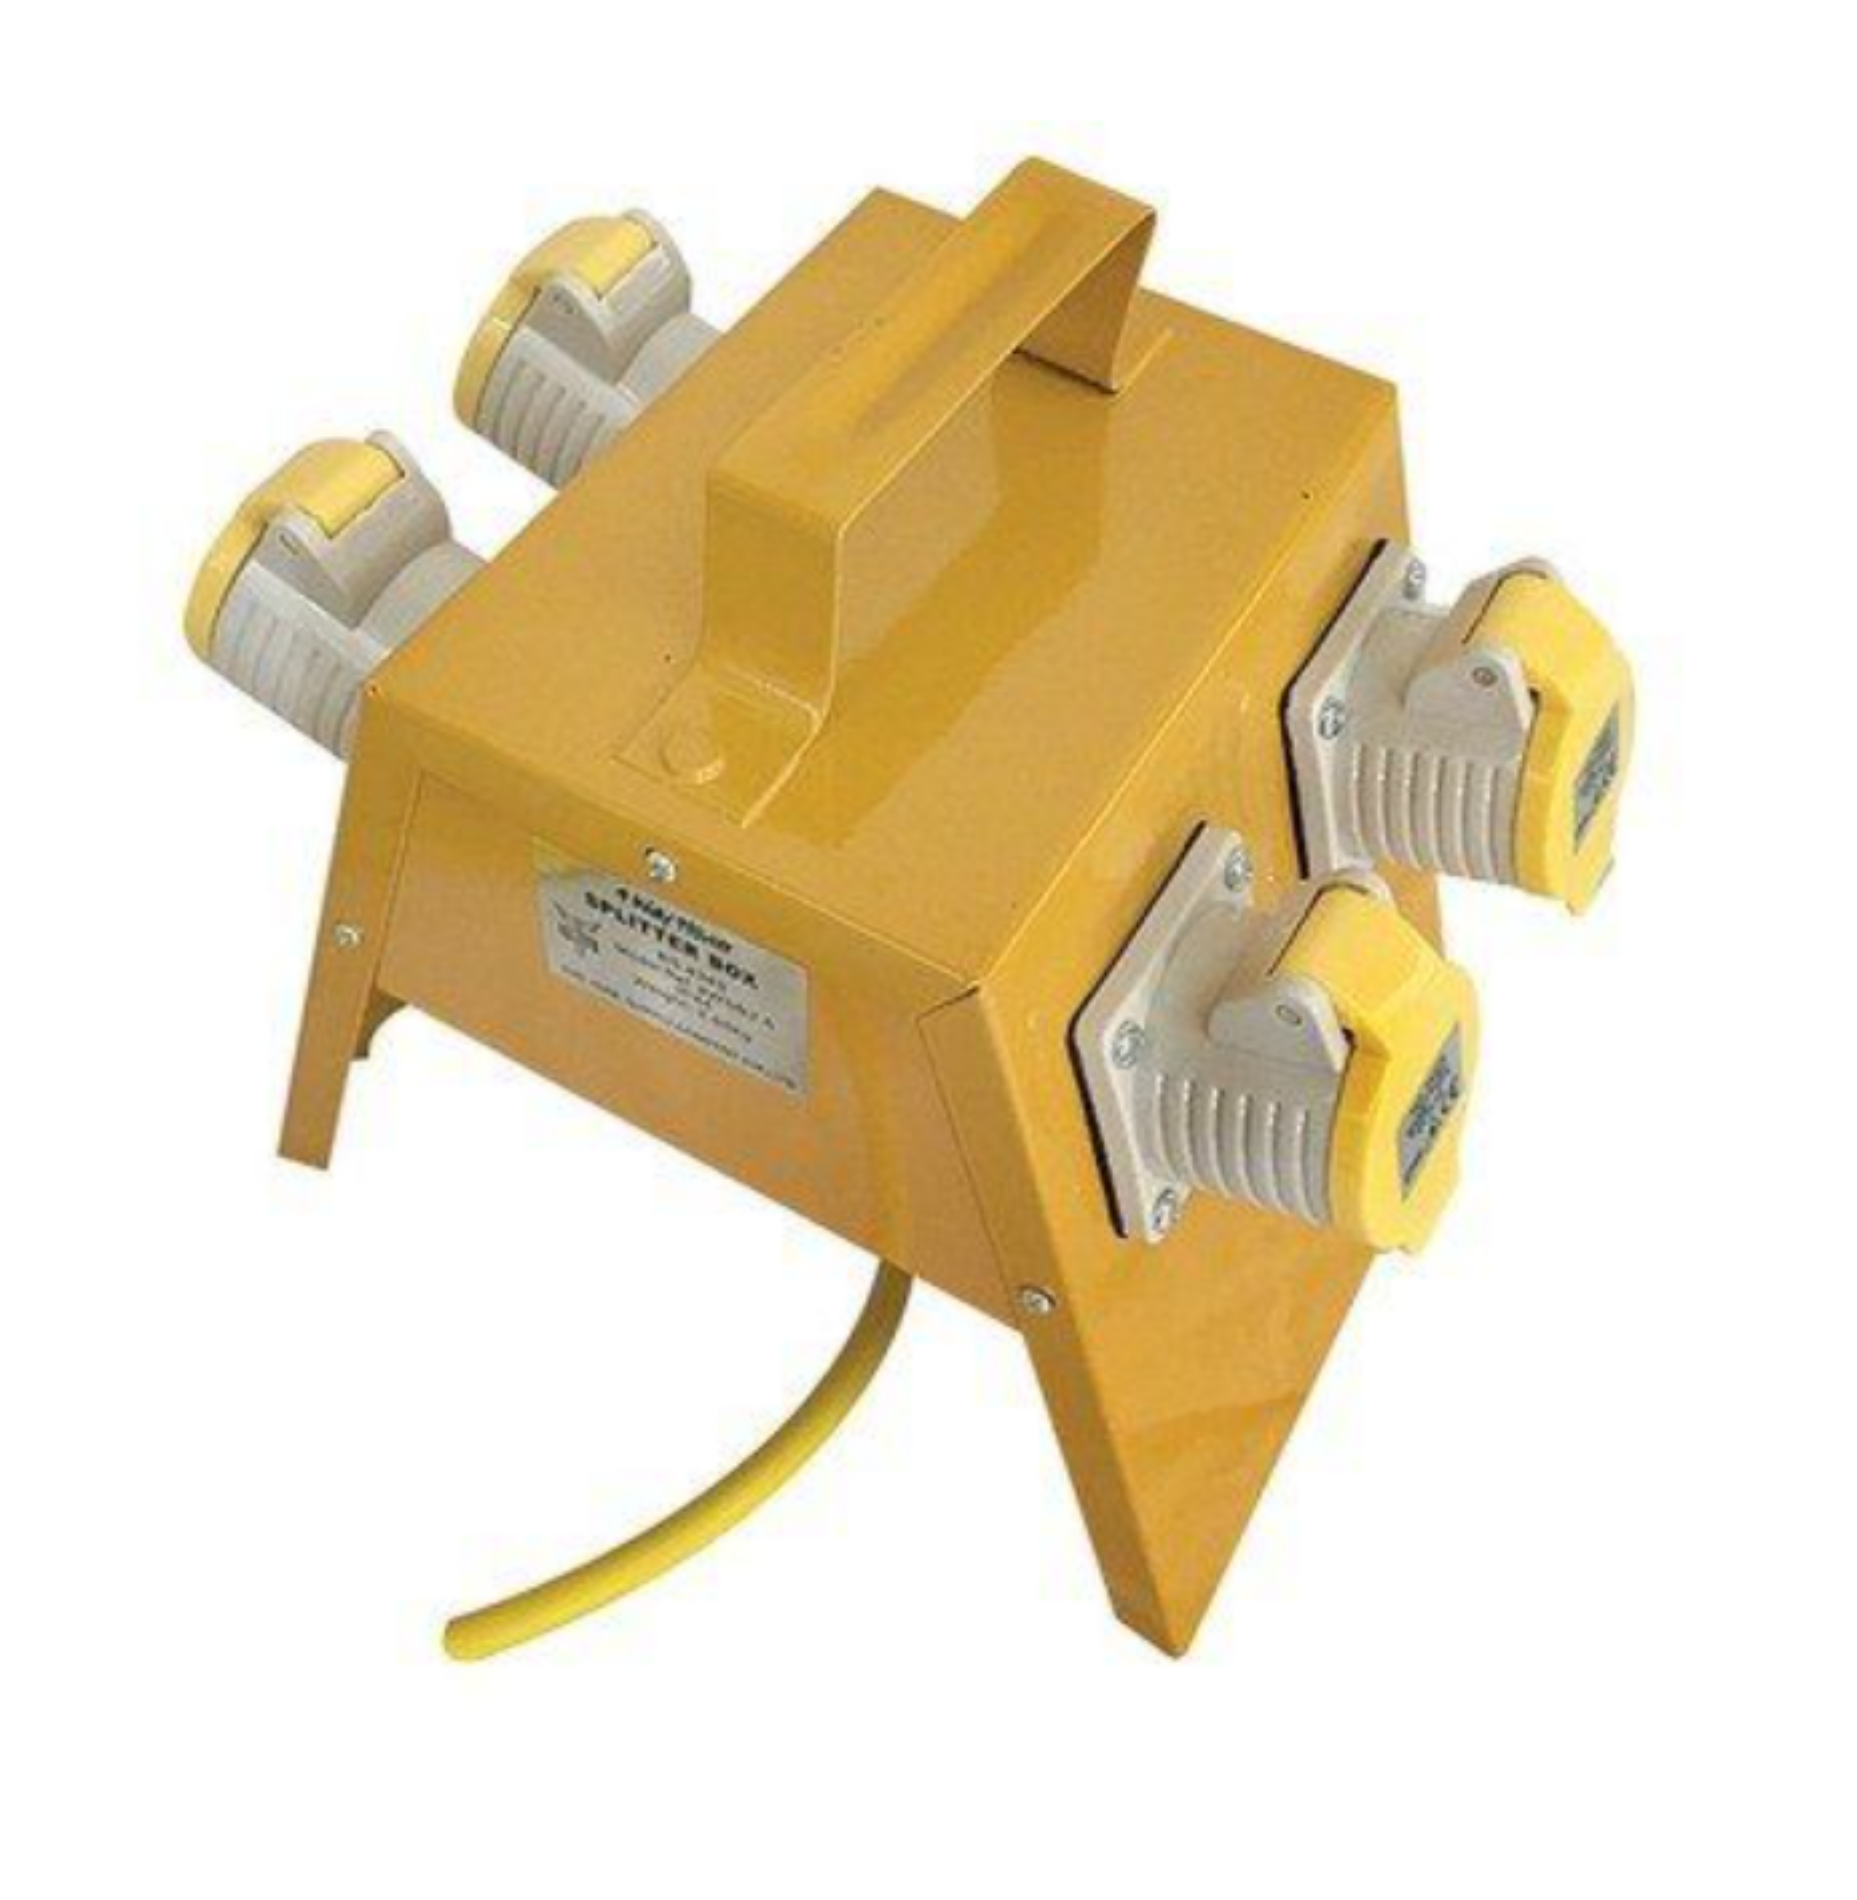 Picture of Four Way Splitter Box - 110V / 16A (2.5mm)